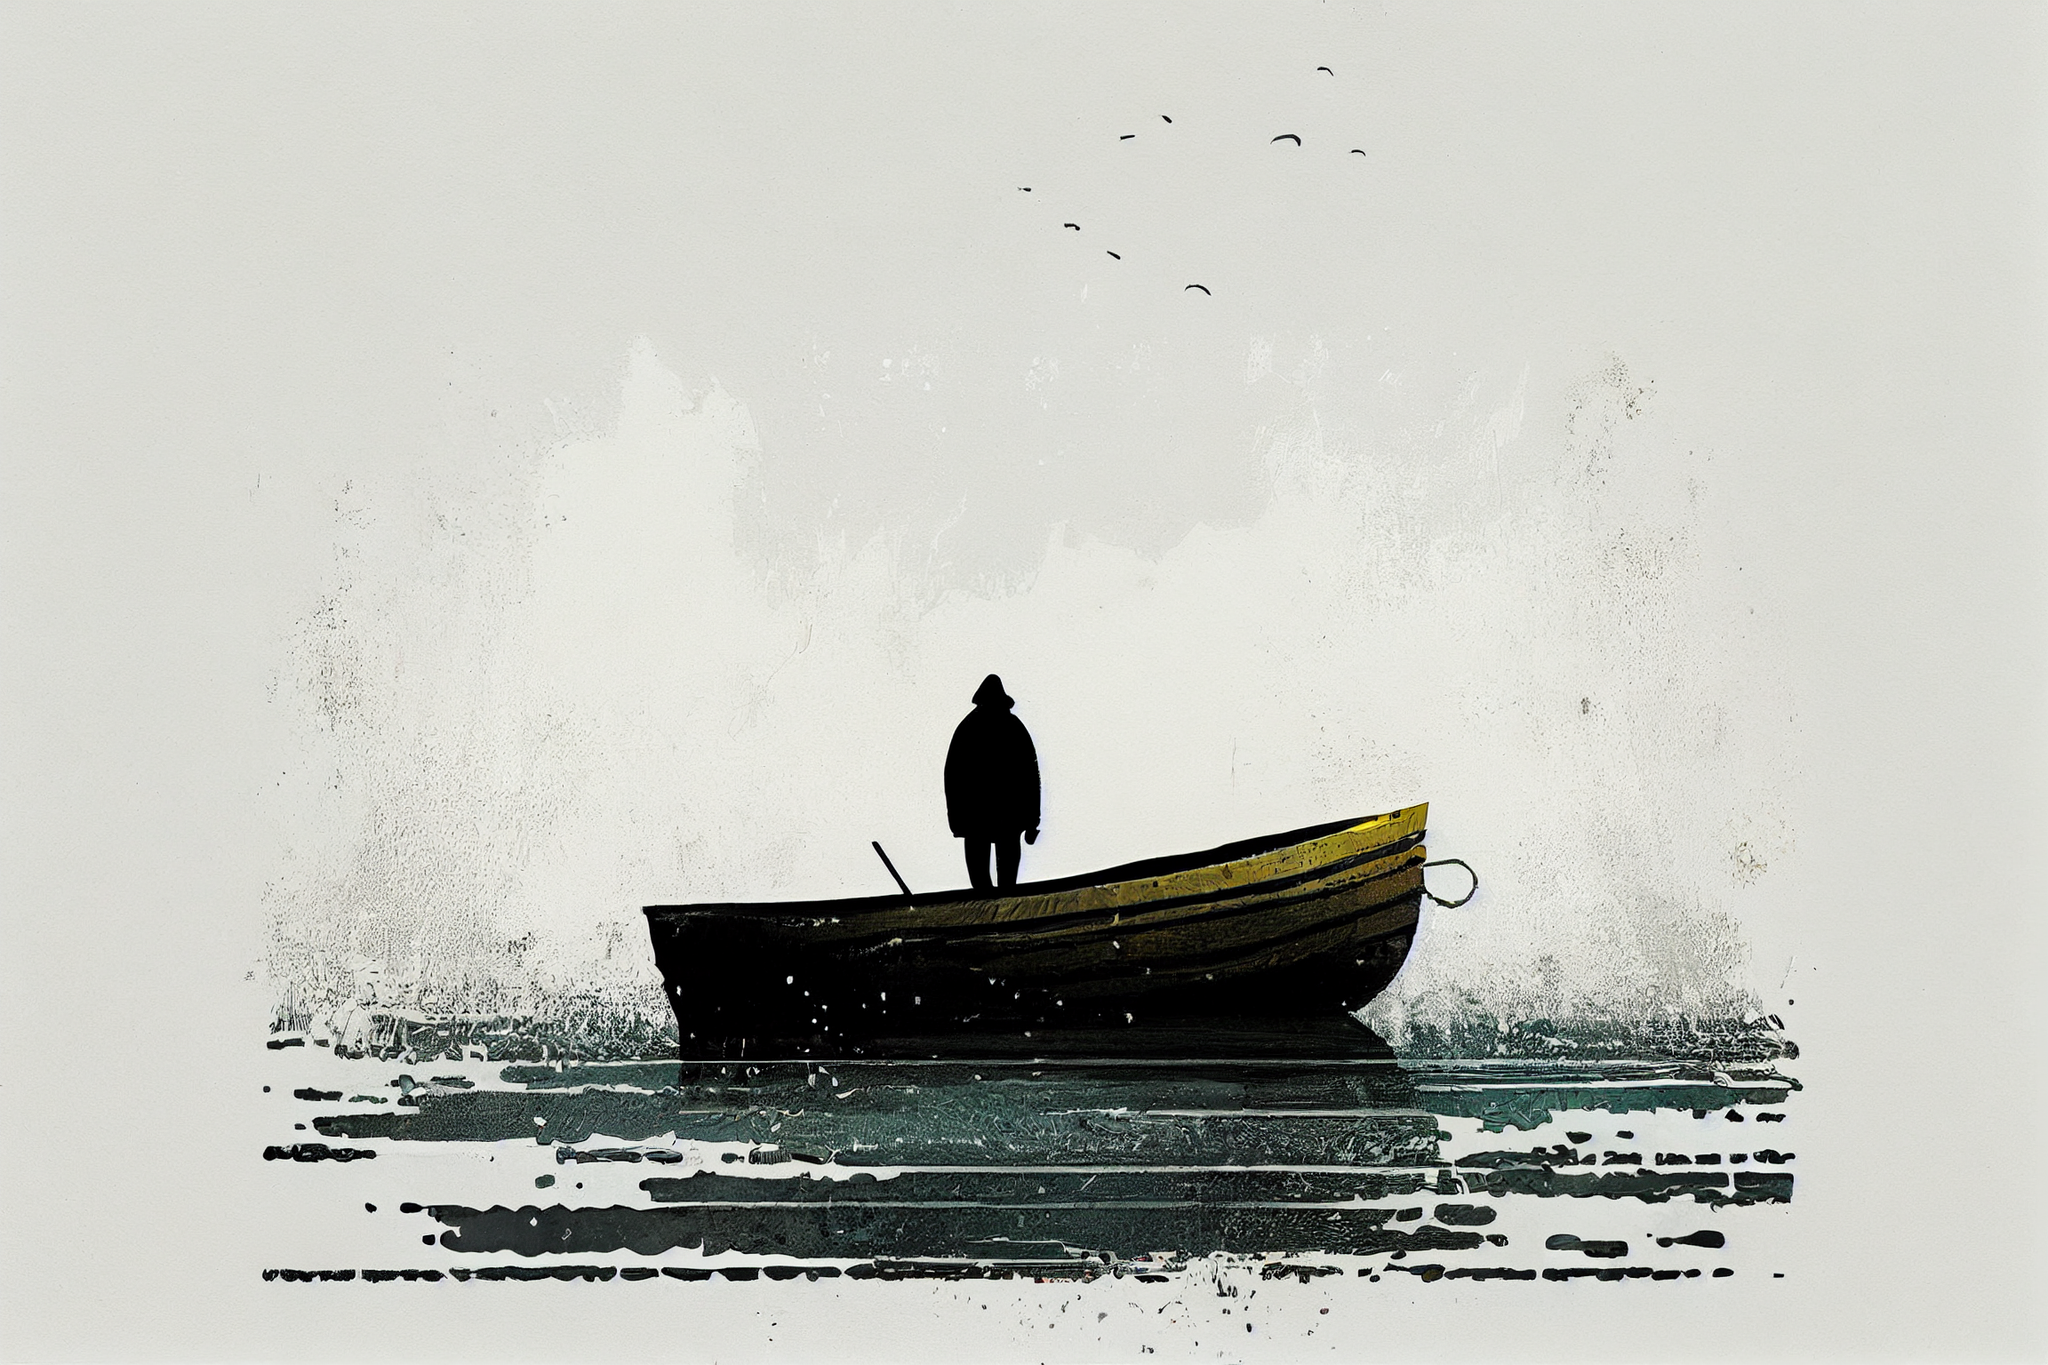 Tranquil Waters: A Minimalistic Art Print of a Fisherman with His Boat